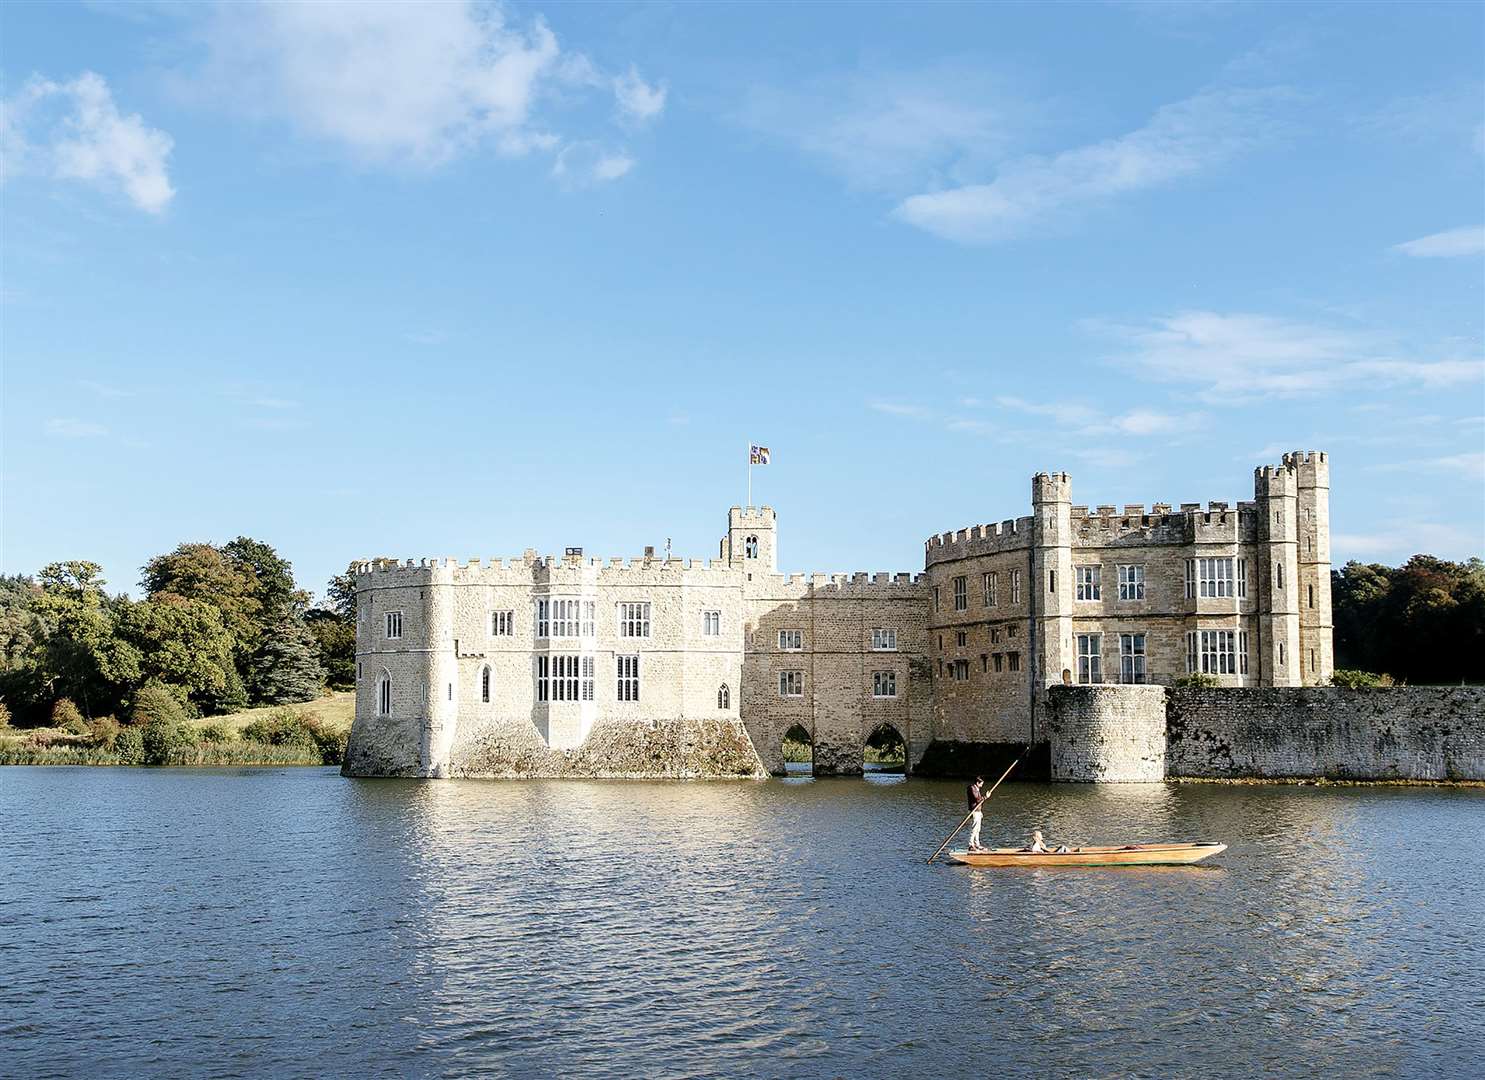 Do you know a creative youngster who could write a story for Leeds Castle's 900th anniversary?